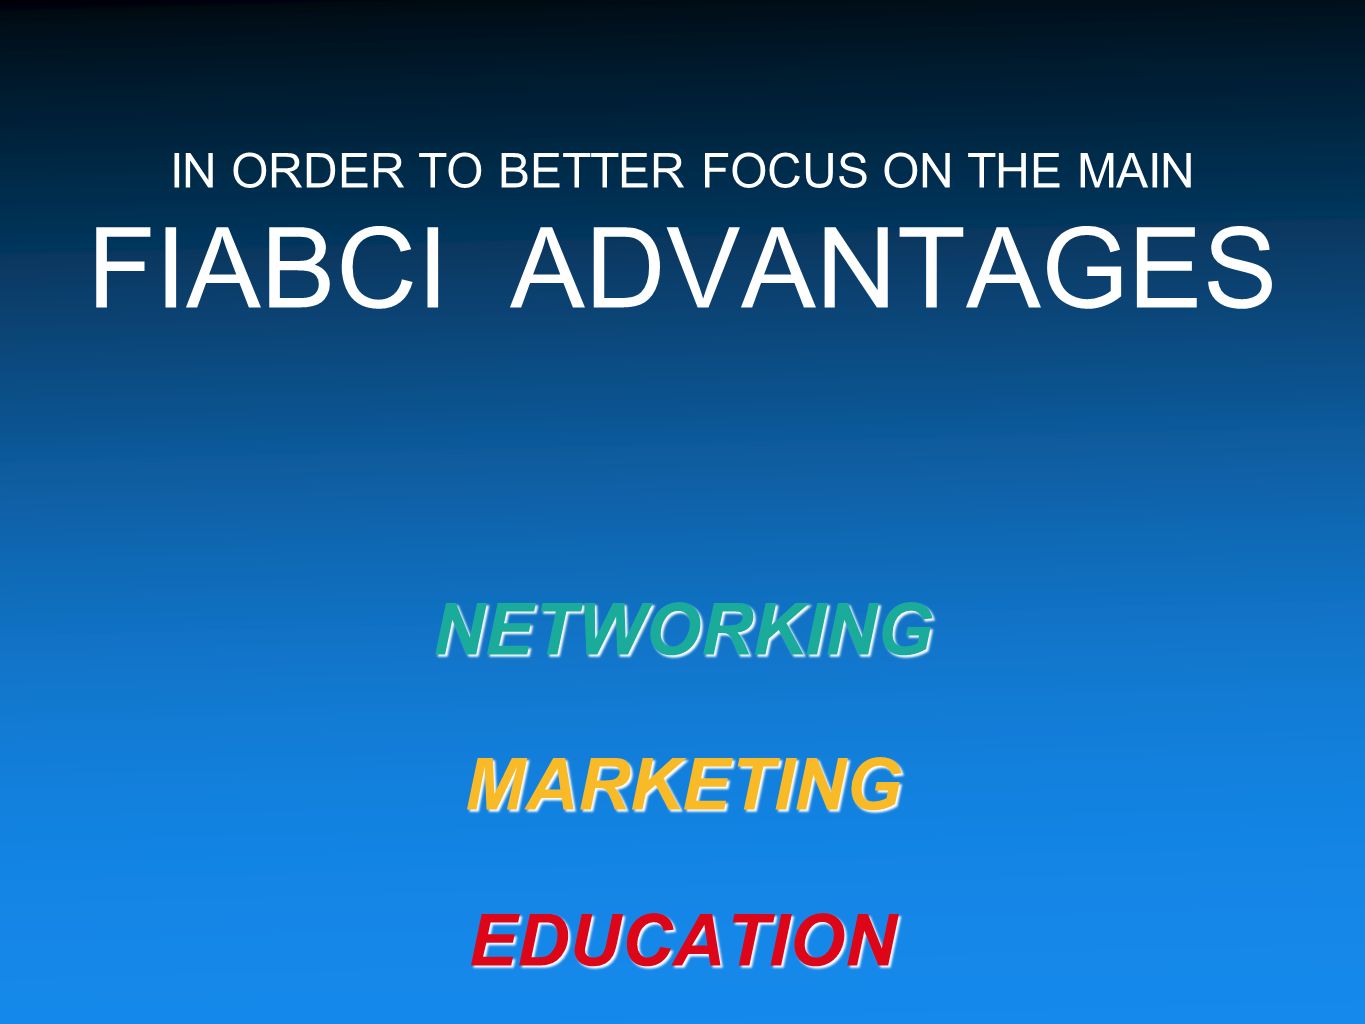 IN ORDER TO BETTER FOCUS ON THE MAIN FIABCI ADVANTAGES NETWORKINGMARKETINGEDUCATION